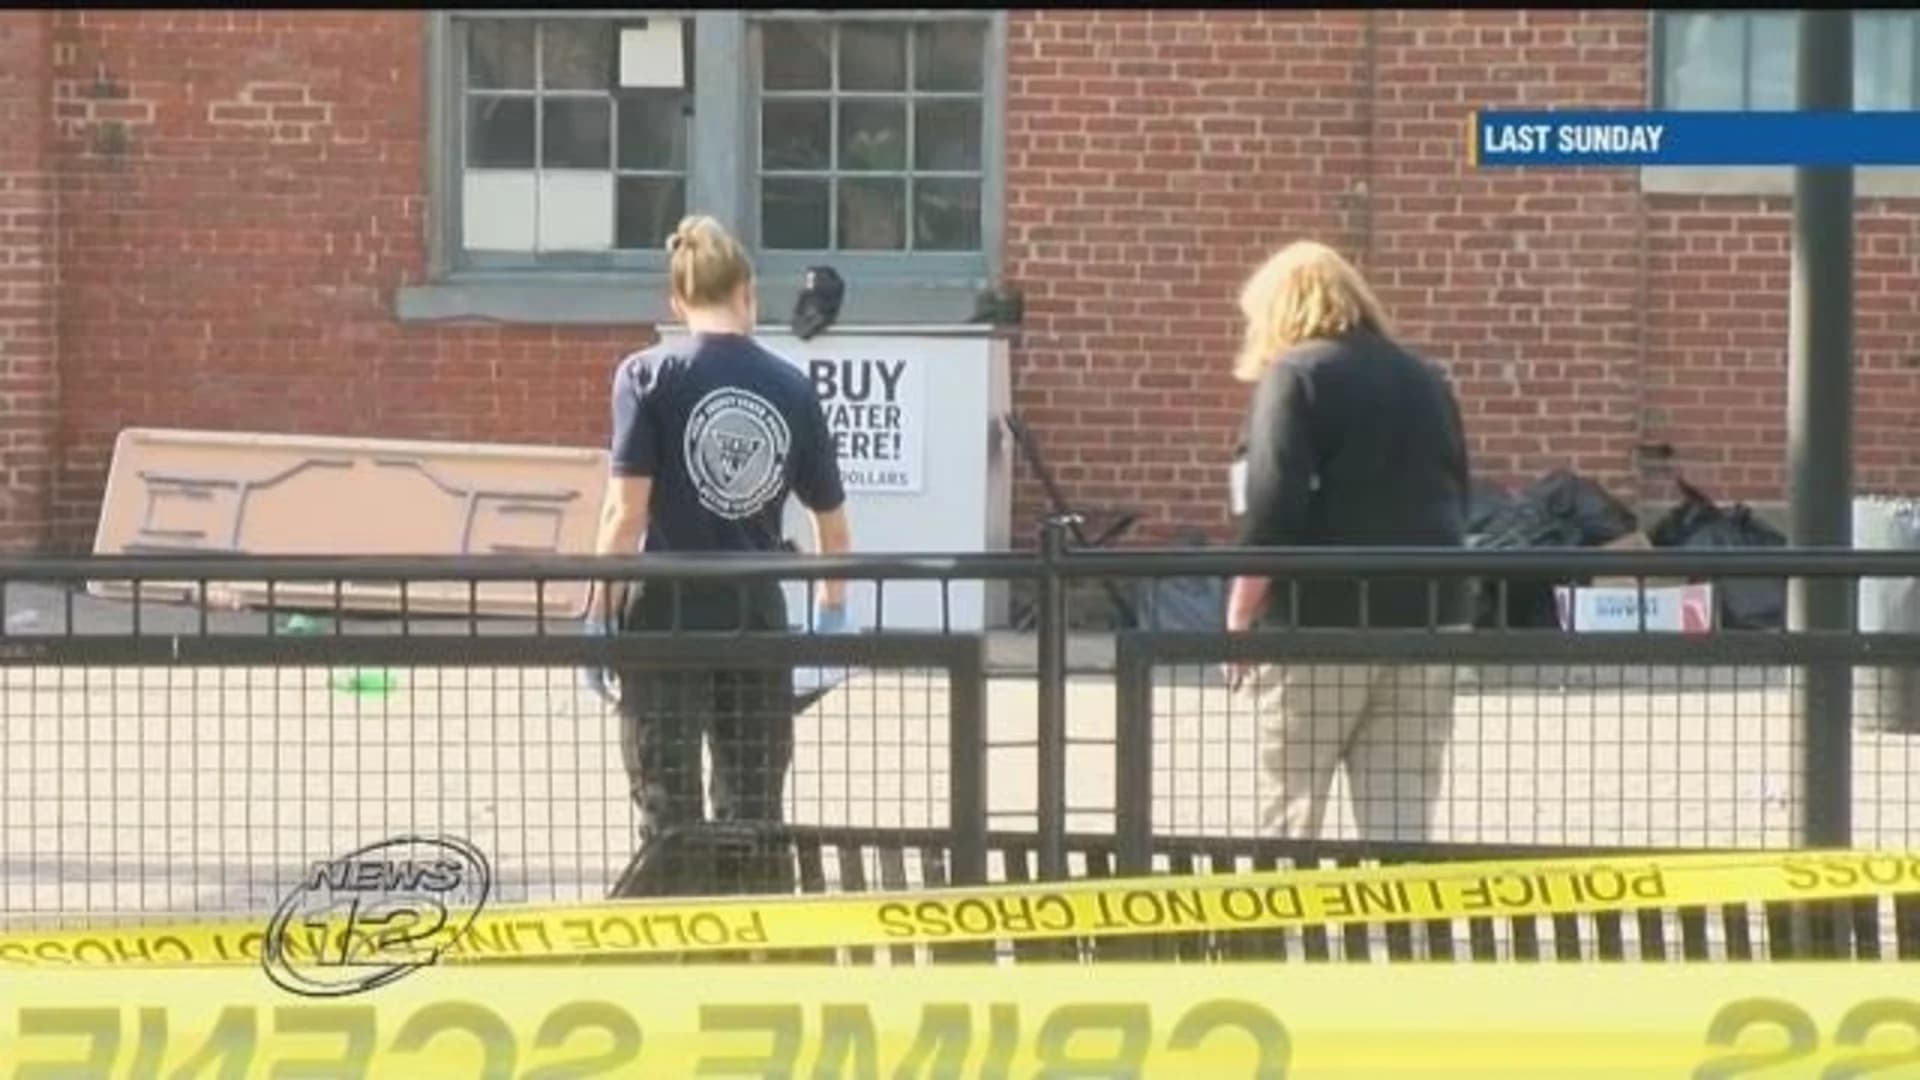 Security to be re-evaluated in wake of Trenton festival shooting